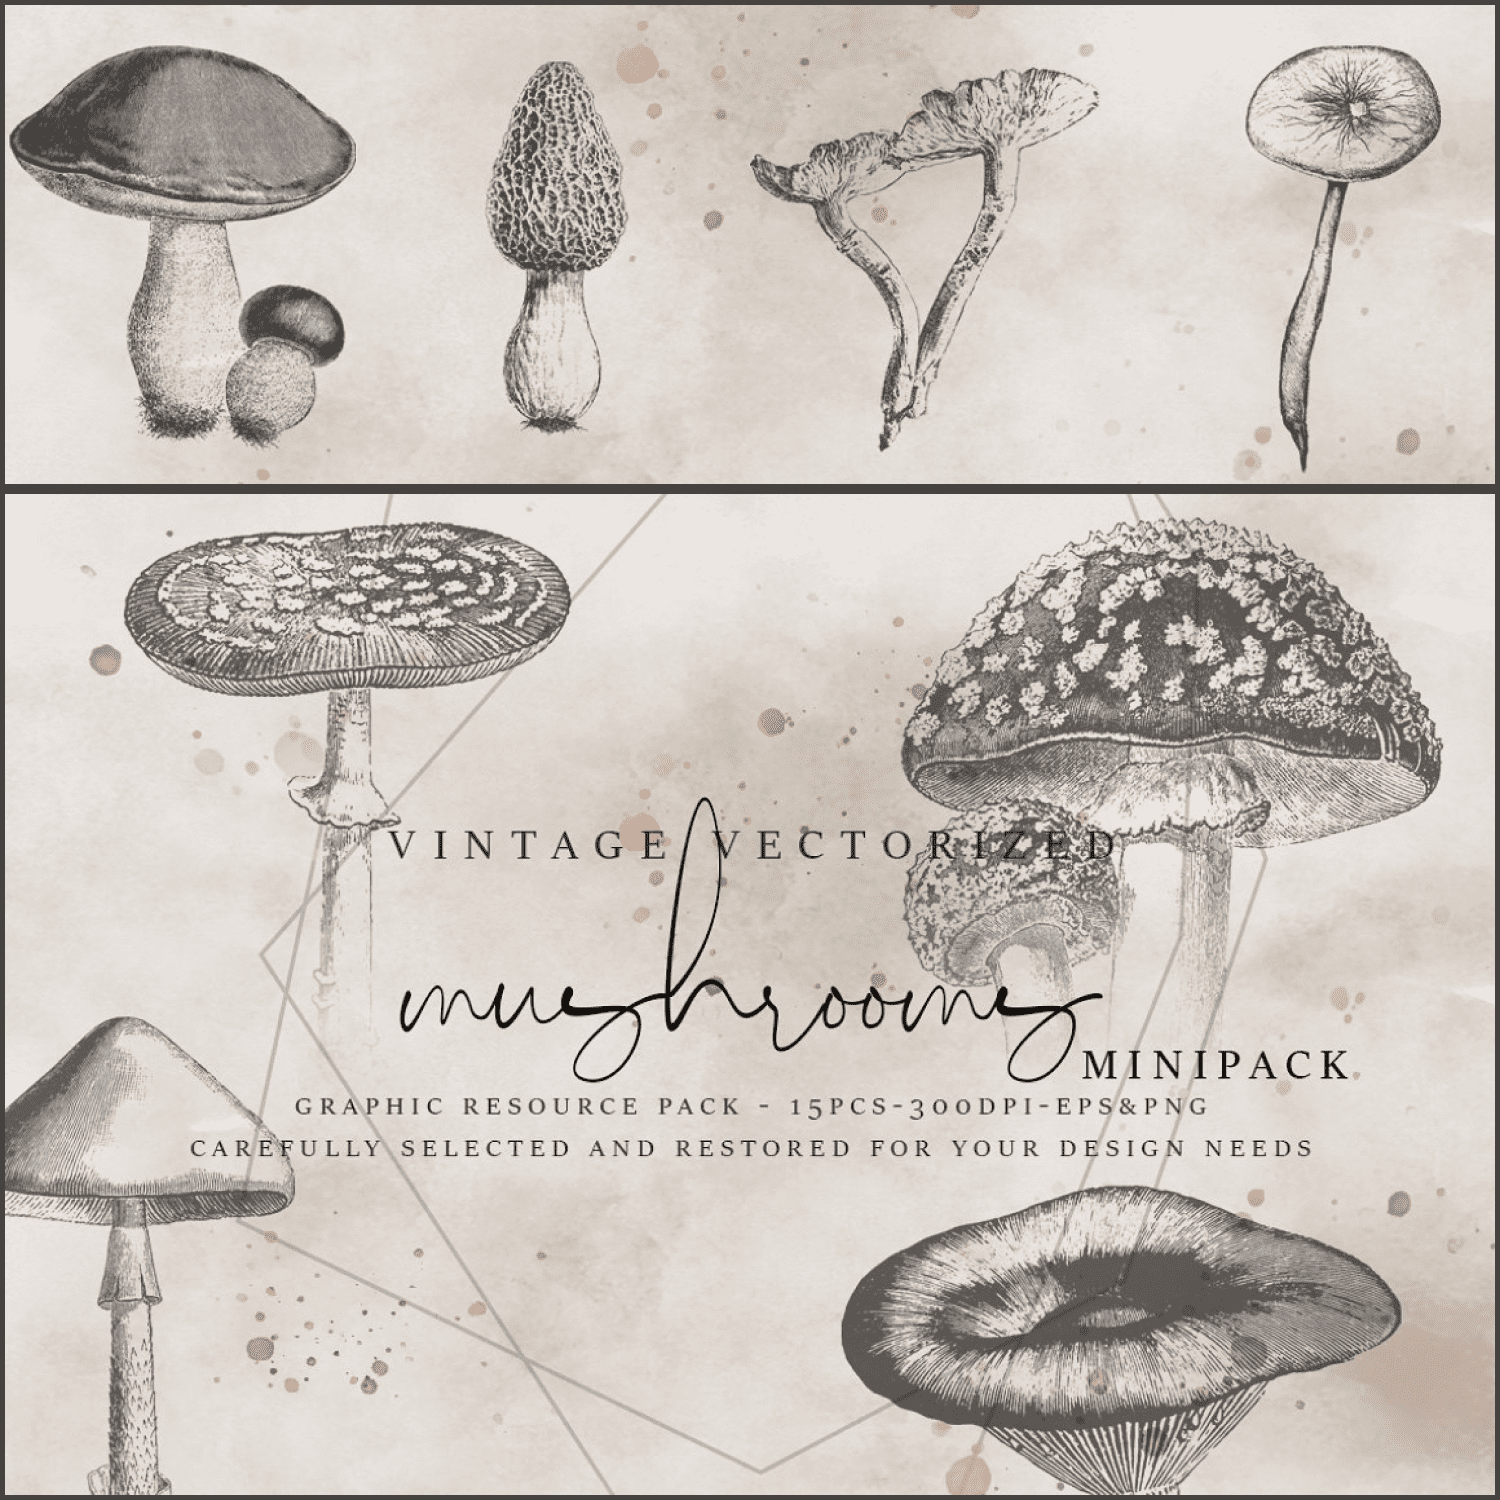 Vintage vectorized mushroom clipart - main image preview.